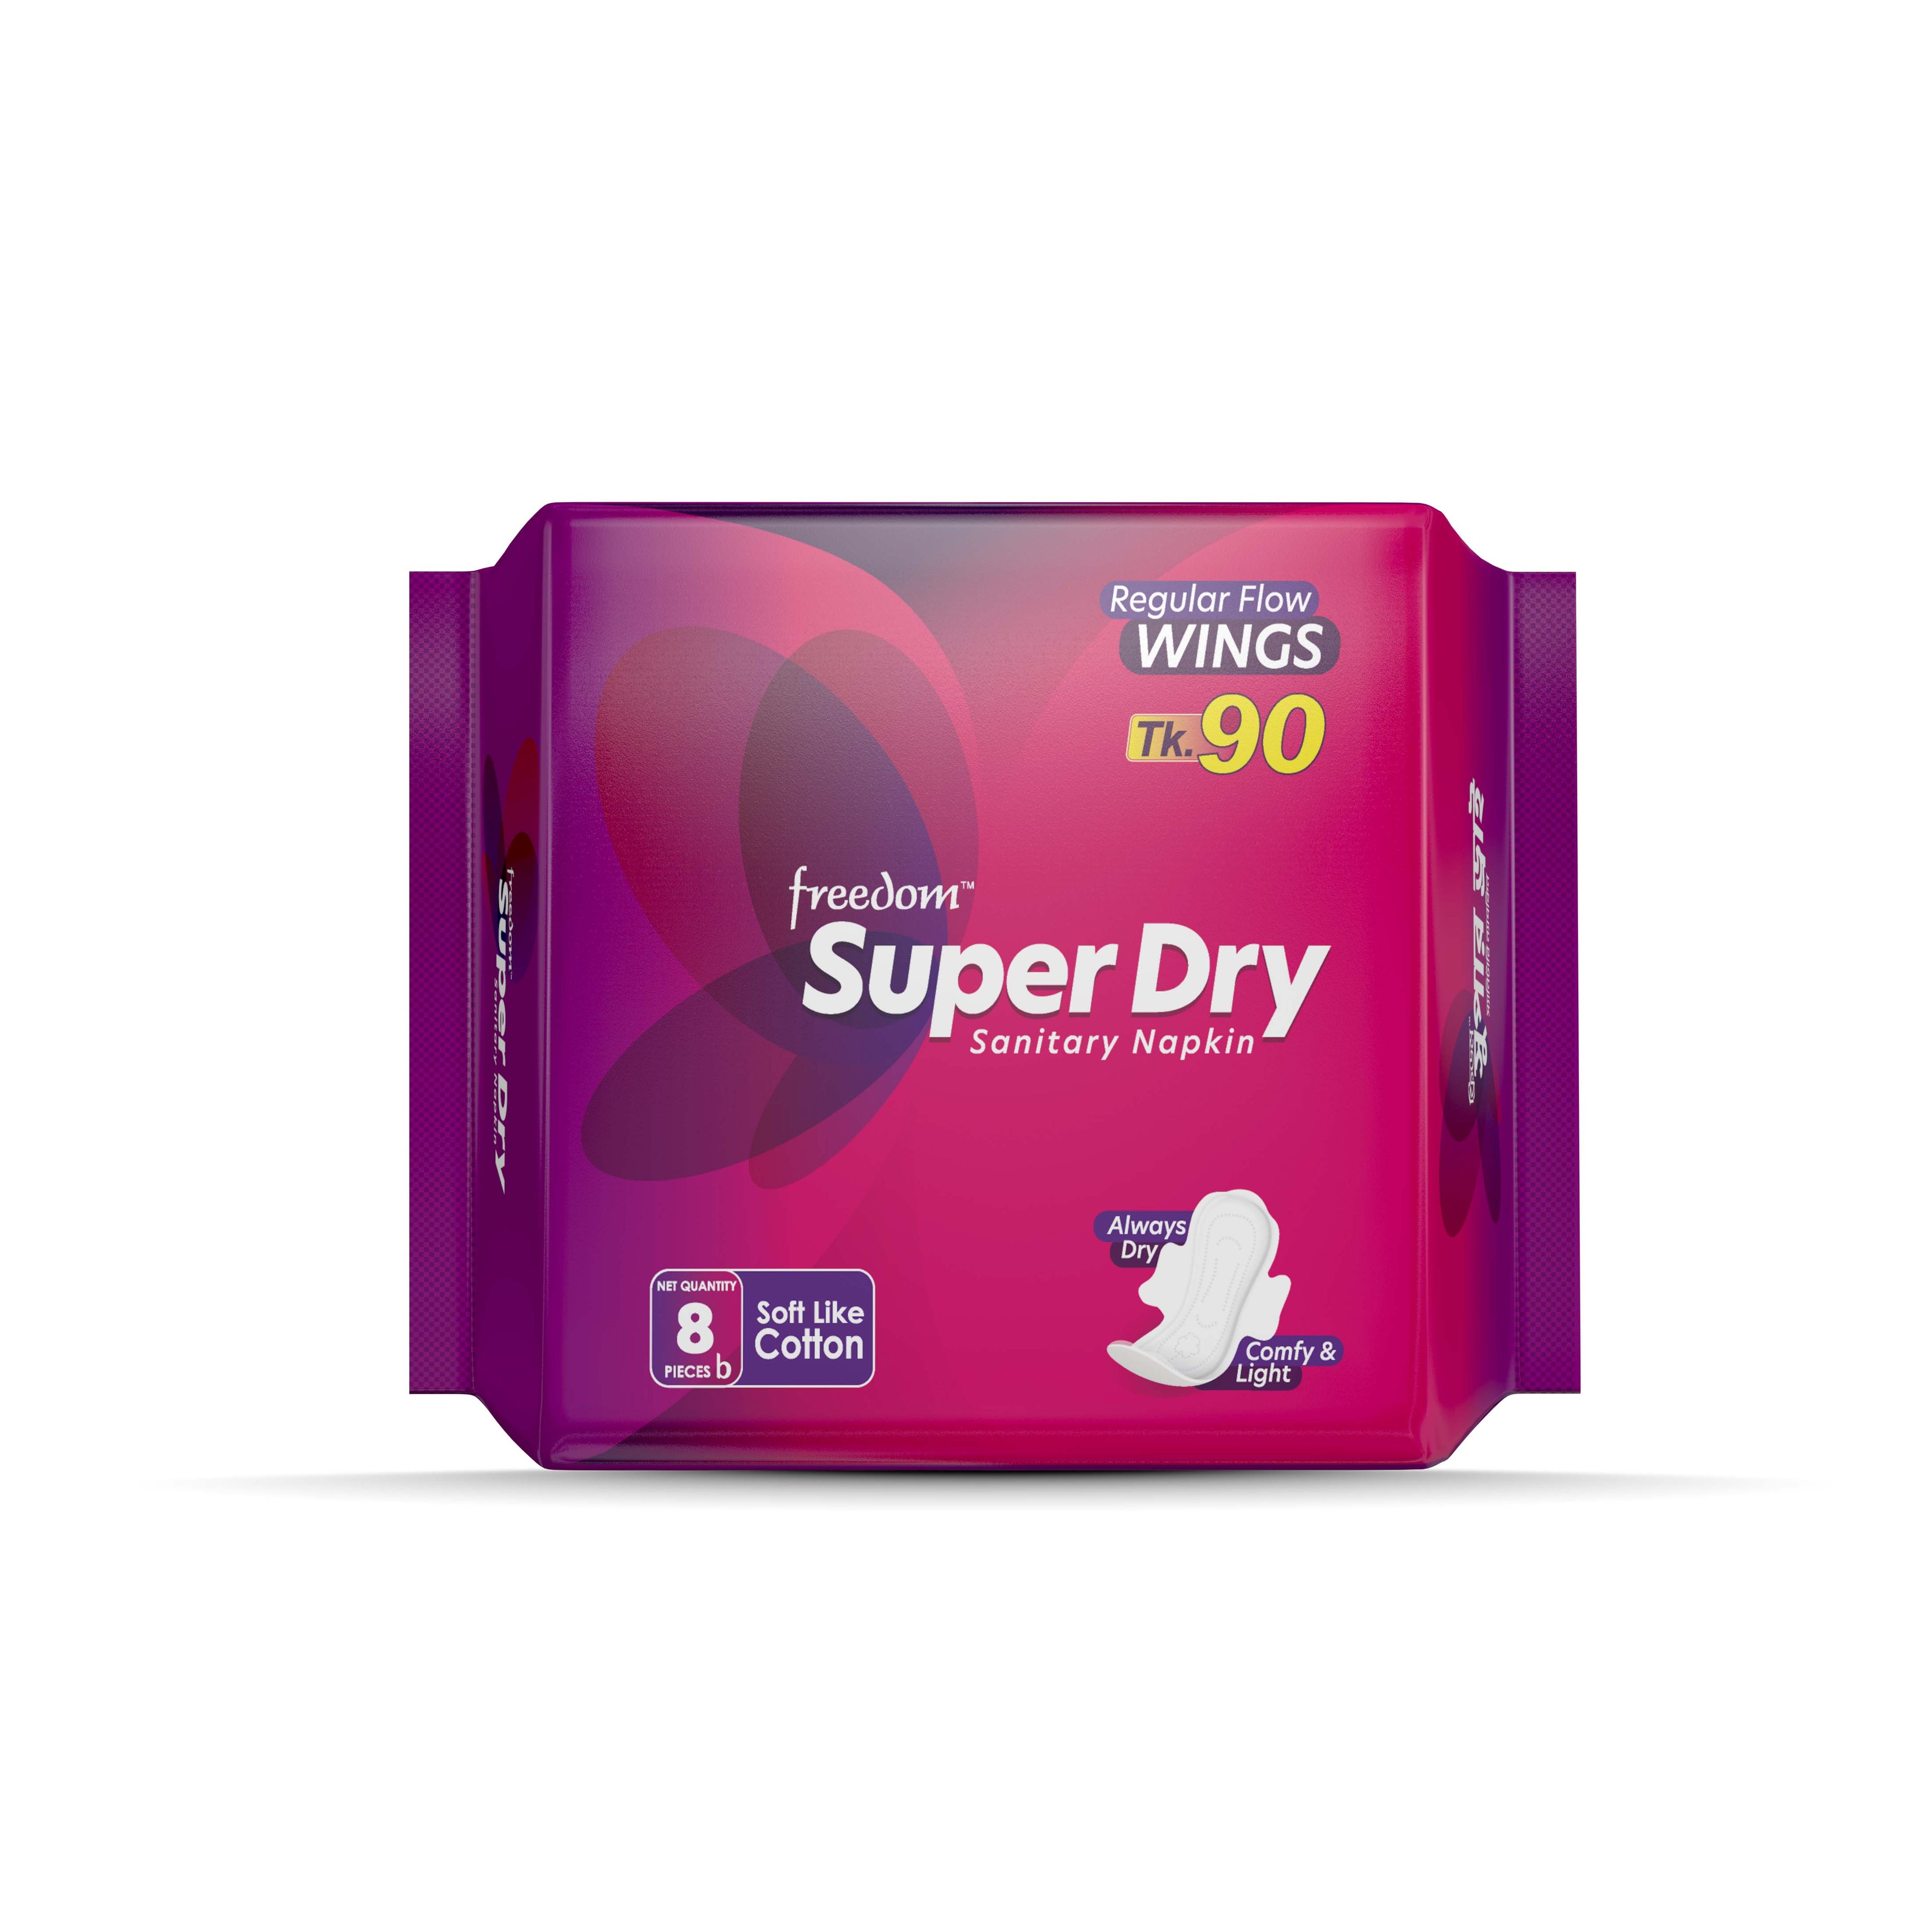 Freedom Super Dry 8 Pads (Buy 1 Get 1 Free)